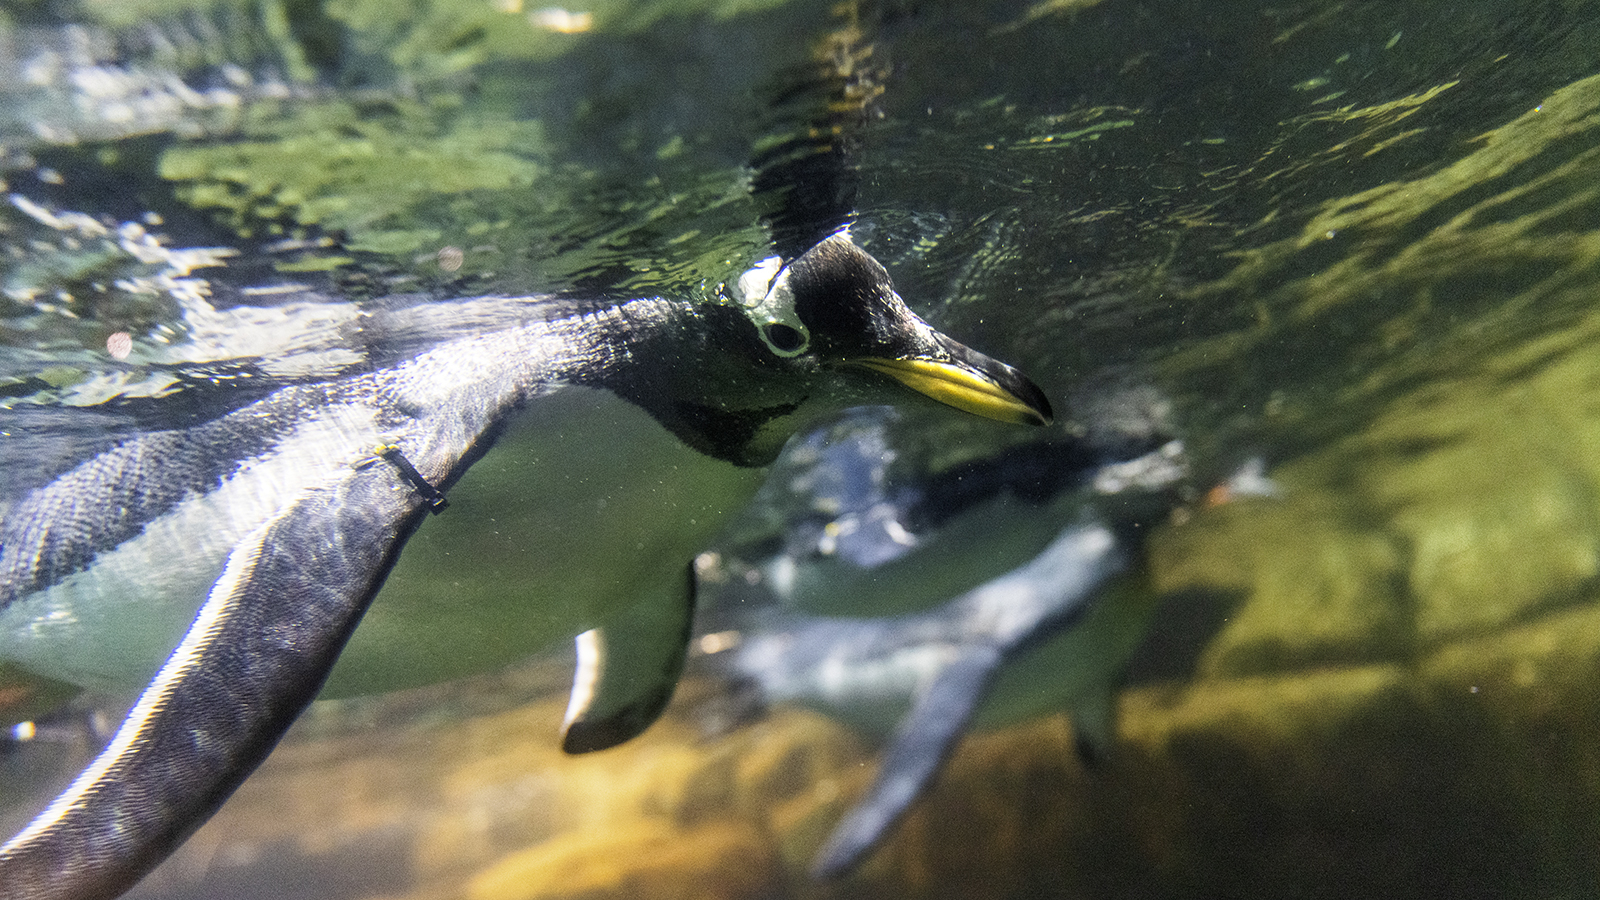 A gentoo penguin takes a plunge at Omaha's Henry Doorly Zoo and Aquarium. Gentoos are the fastest underwater swimmers among all penguin species, reaching speeds of more than 20 miles per hour. 